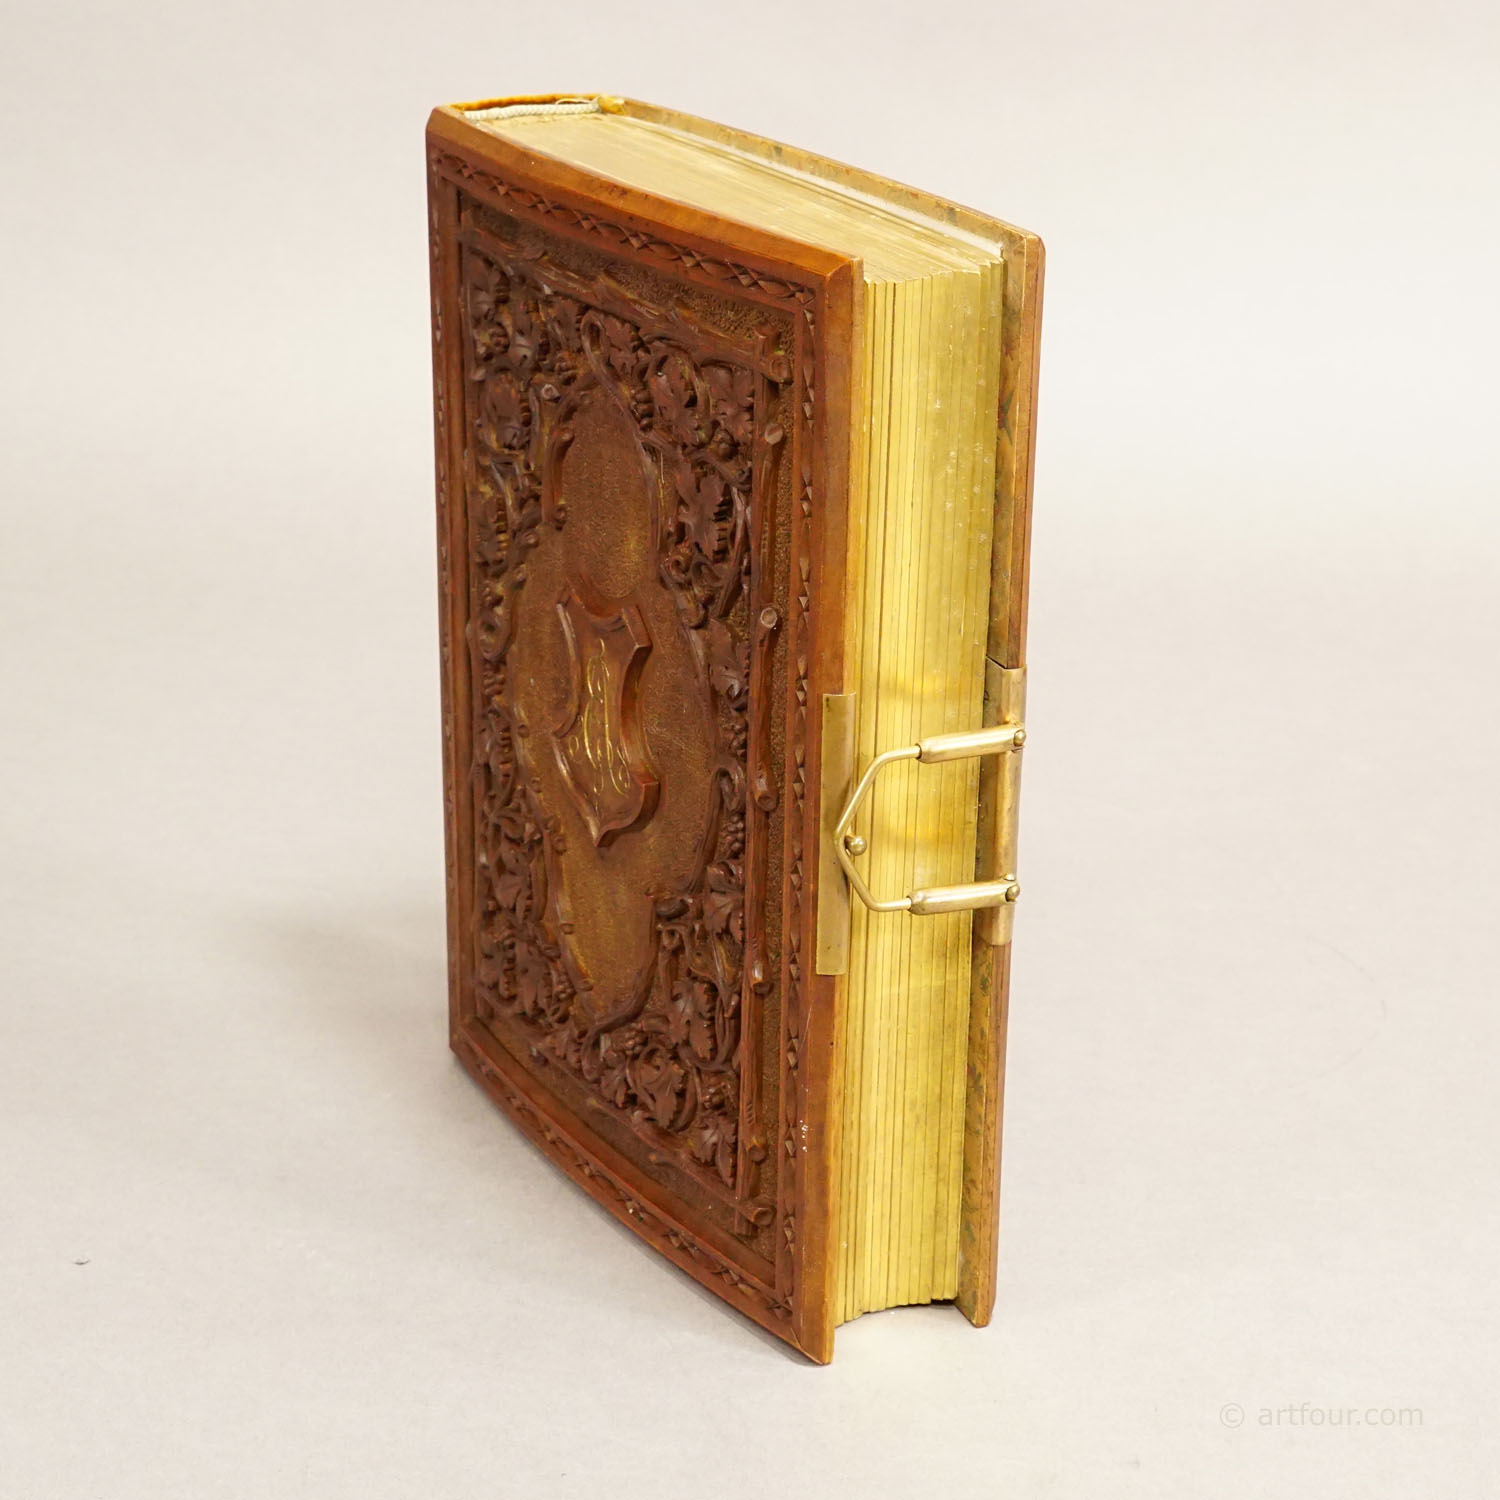 Antique Photo Album with Wooden Carved Cover, Brienz ca. 1900